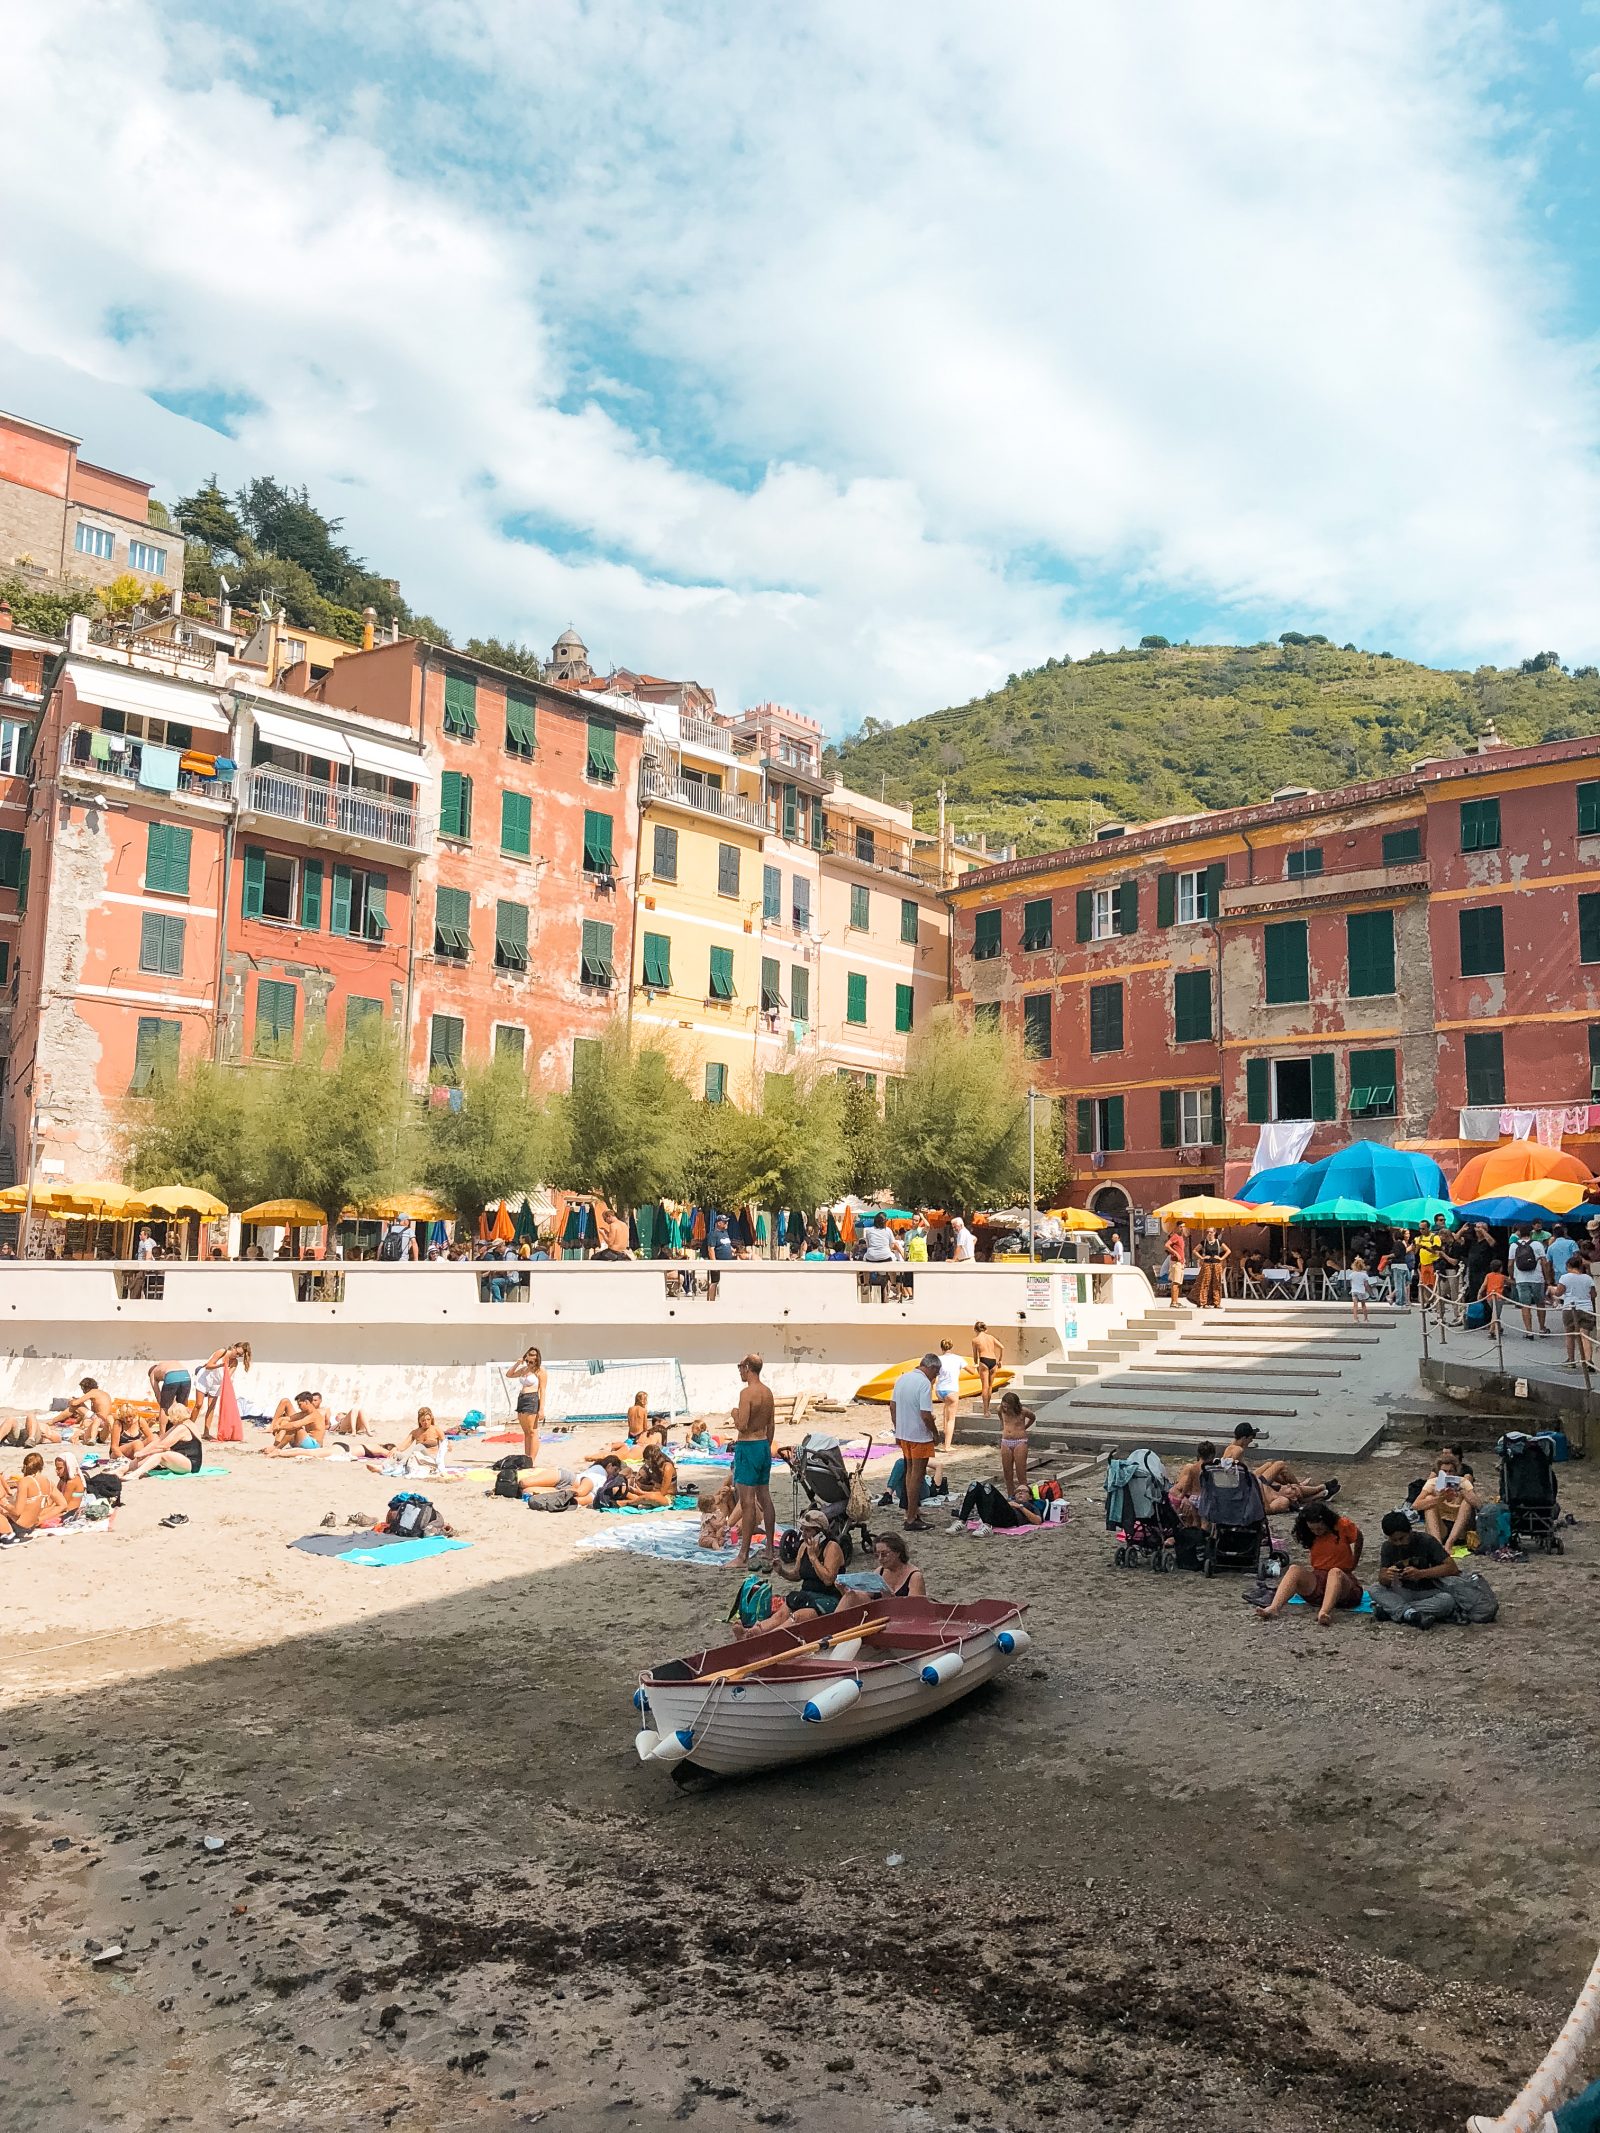 a picture of the colorful buildings on Vernazza